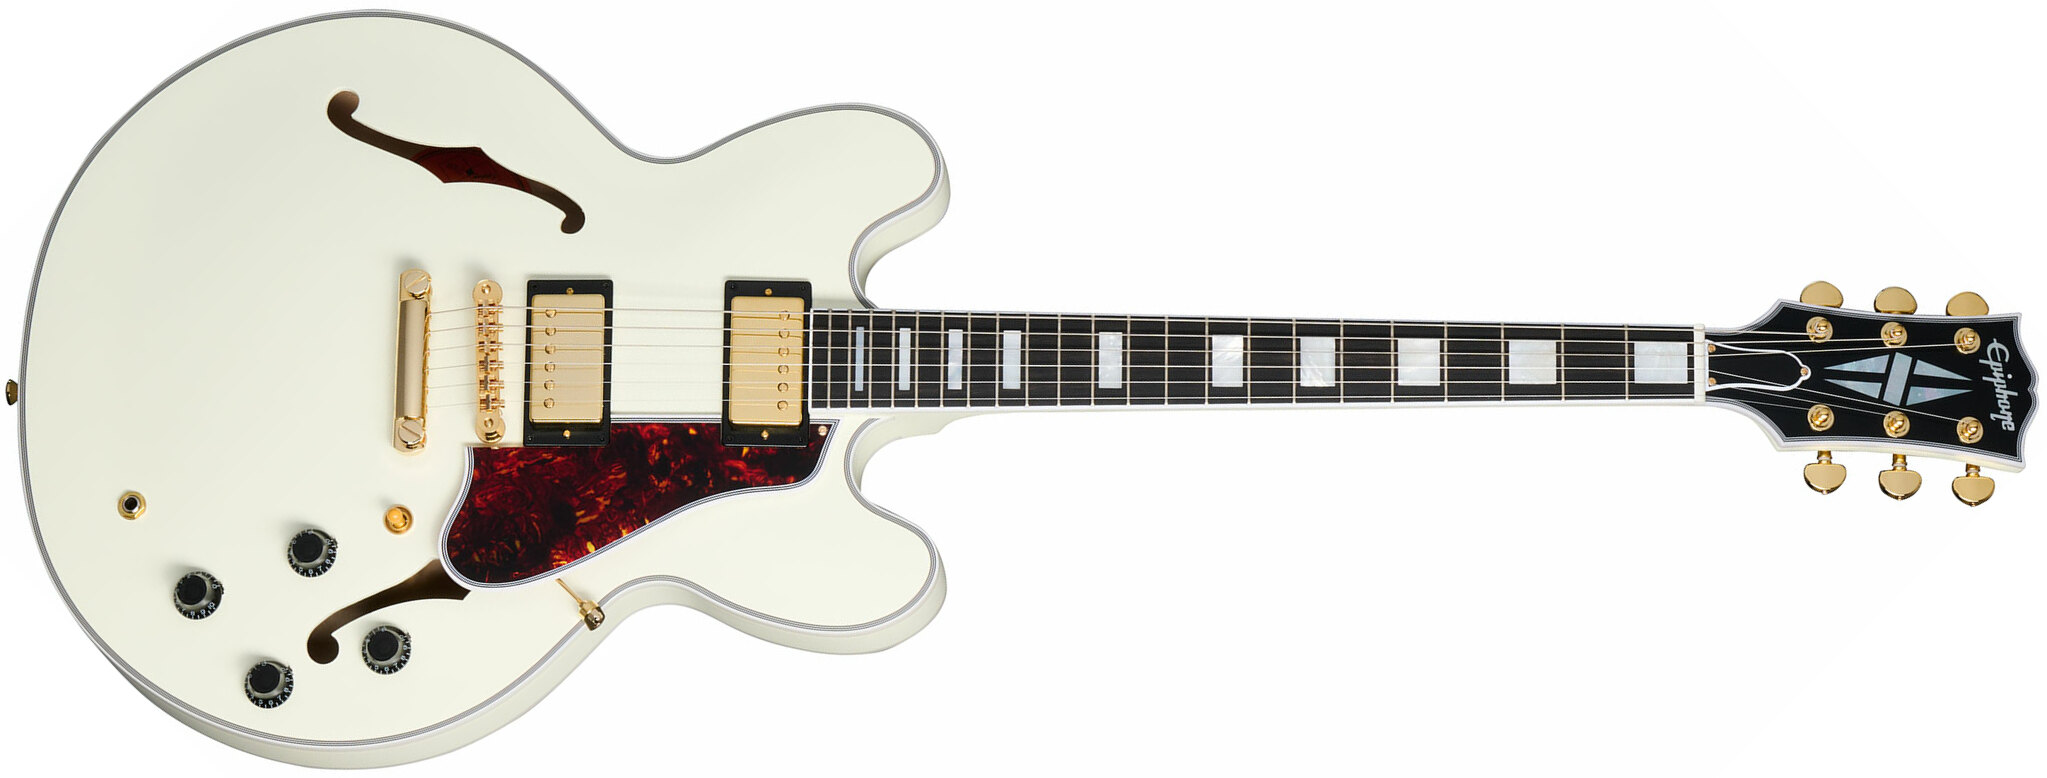 Epiphone Es355 1959 Inspired By 2h Gibson Ht Eb - Vos Classic White - Semi-hollow electric guitar - Main picture